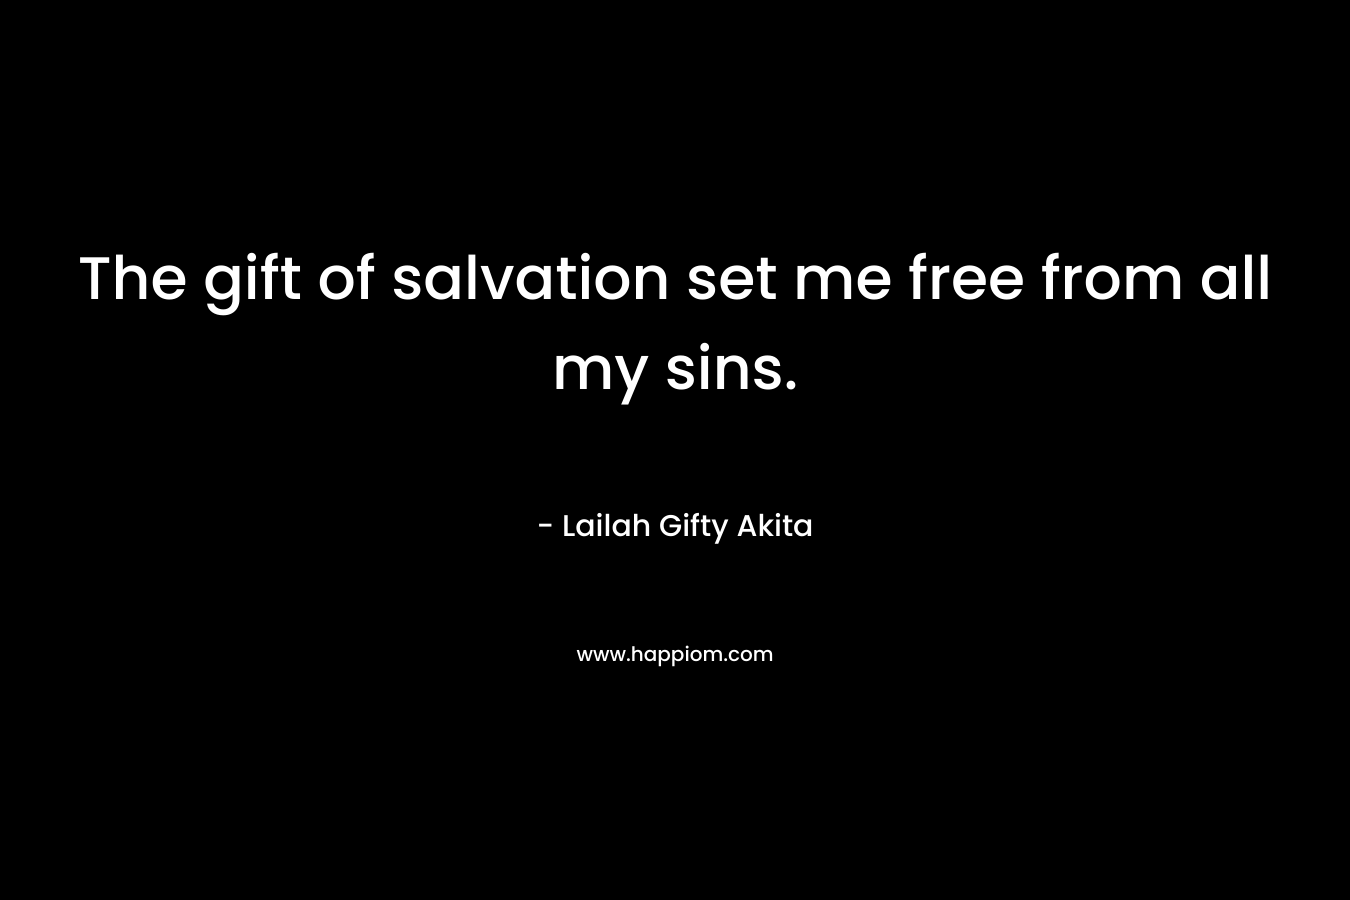 The gift of salvation set me free from all my sins.